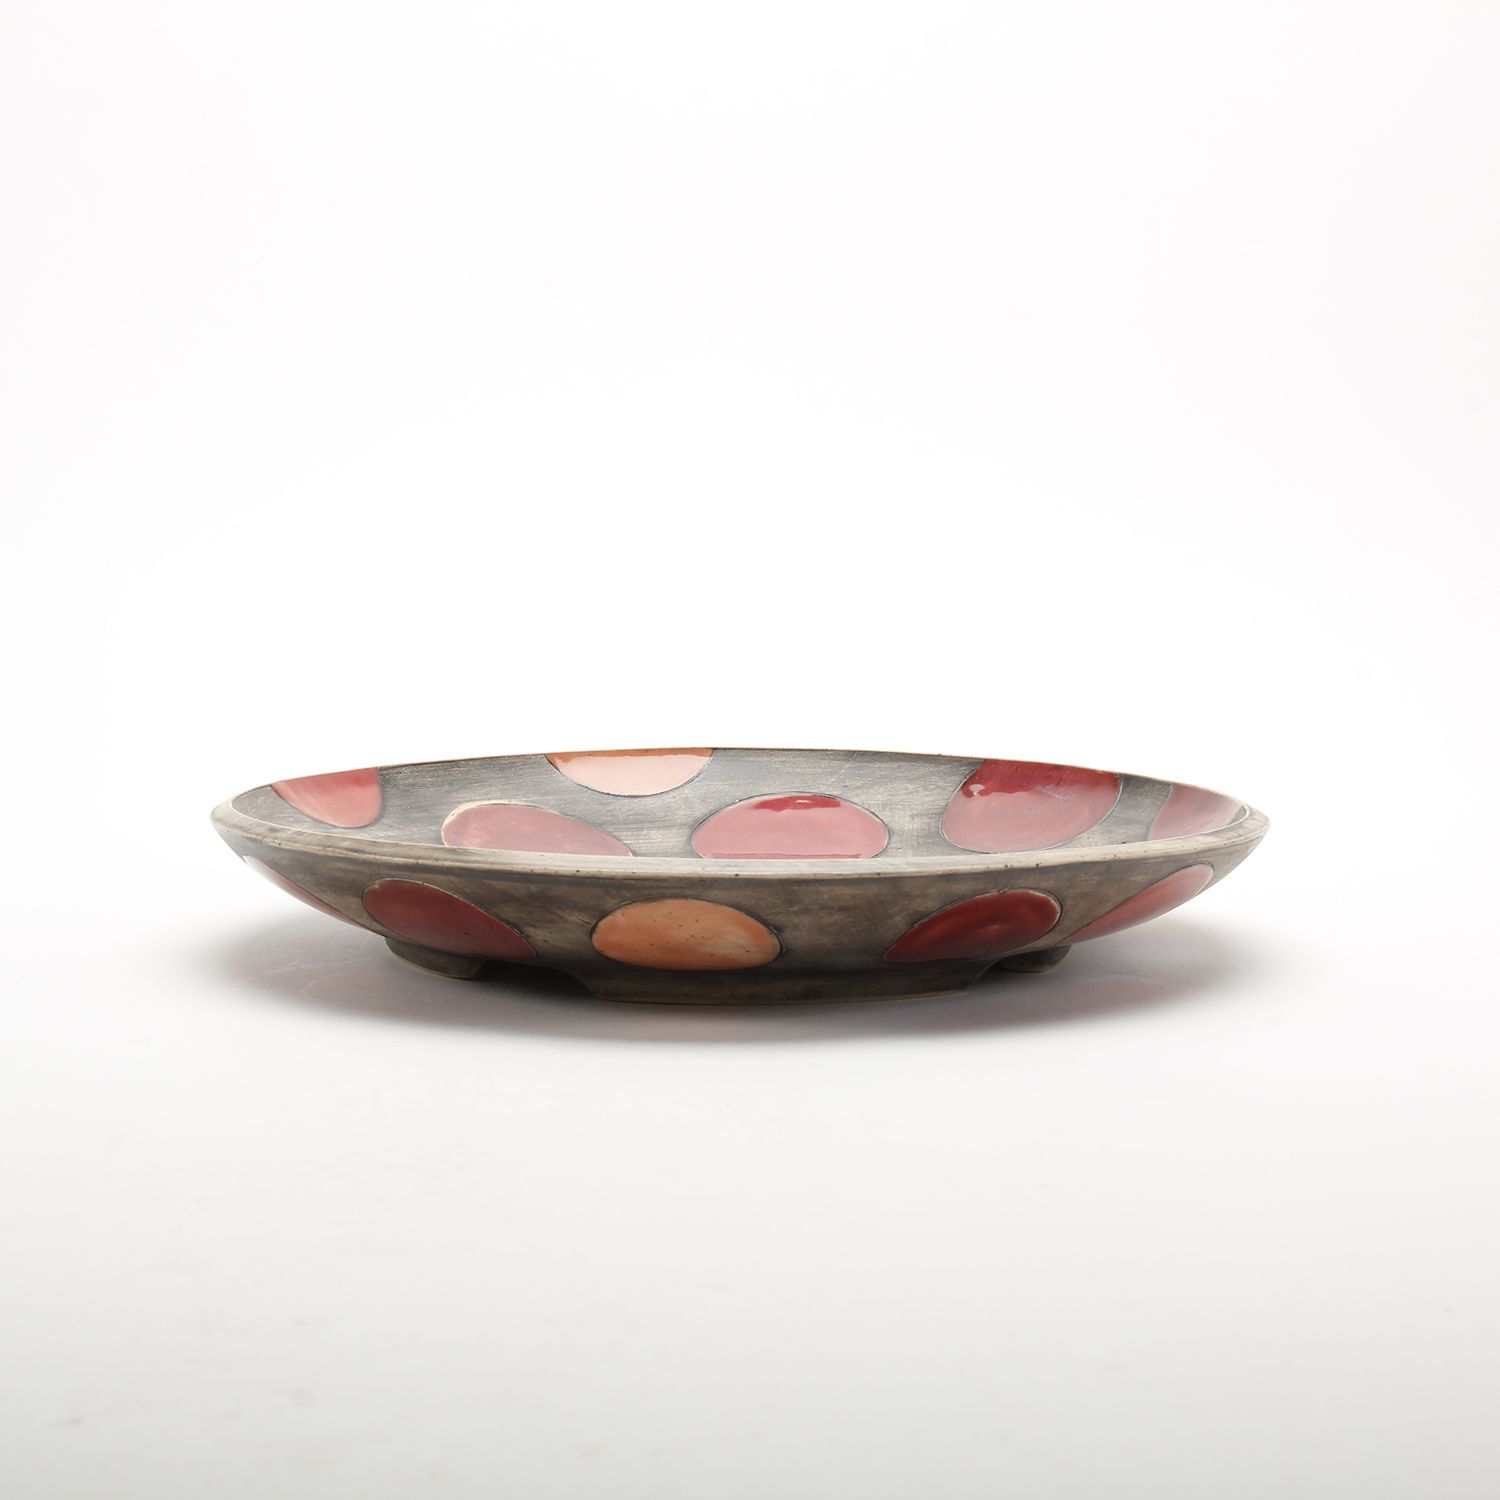 Marla Benton: Carved Platter Product Image 2 of 2